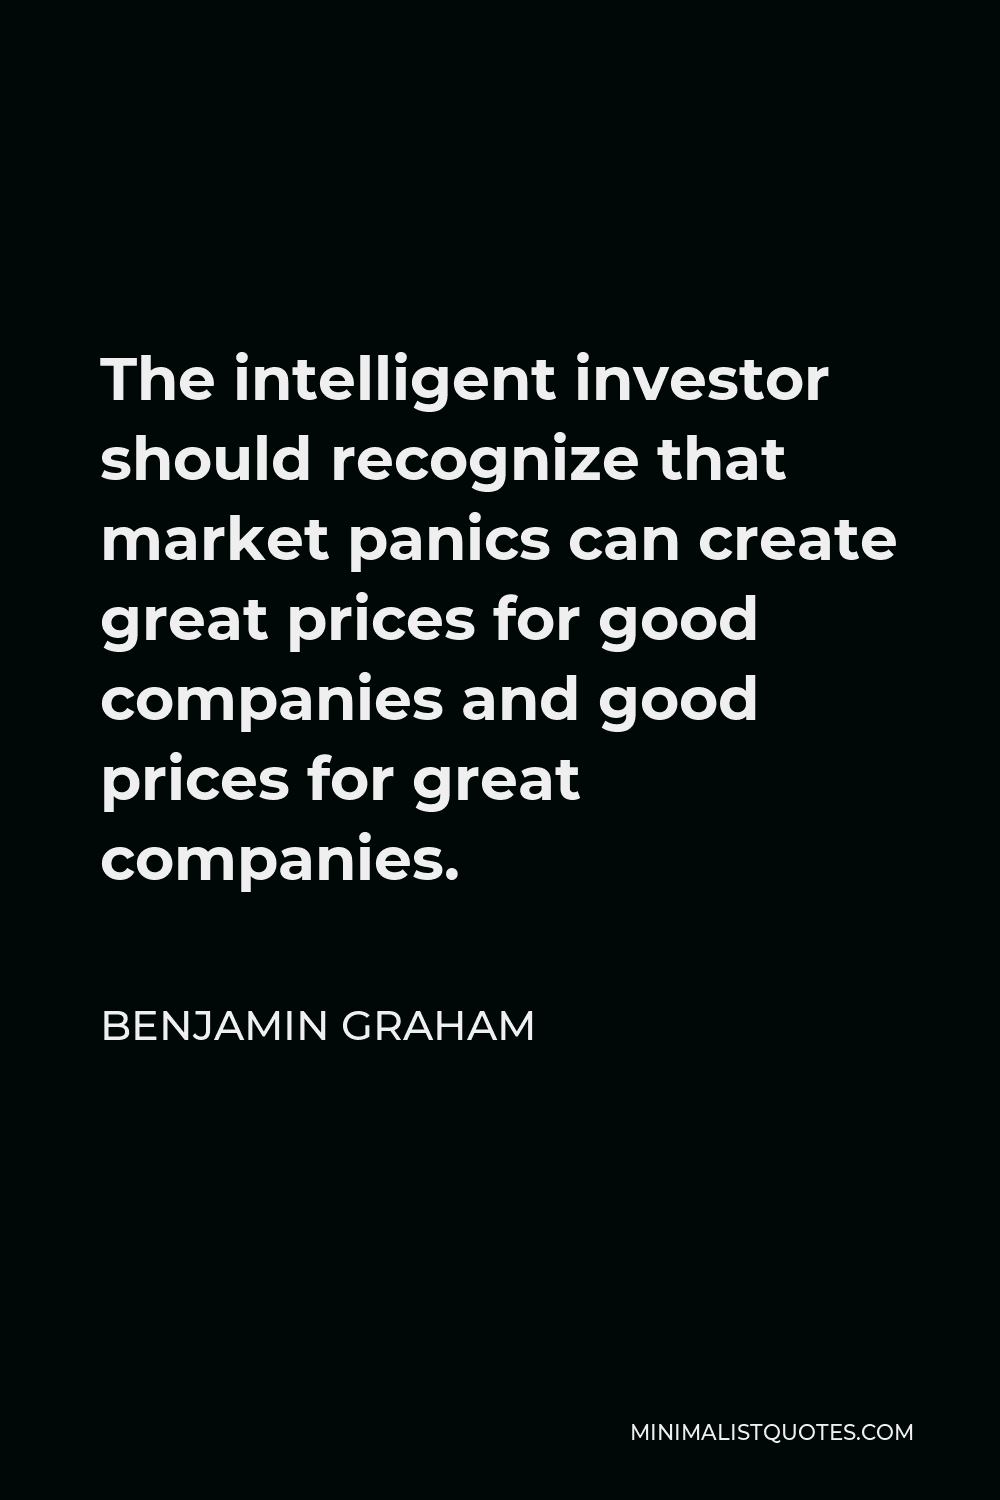 Benjamin Graham Quote - The intelligent investor should recognize that market panics can create great prices for good companies and good prices for great companies.